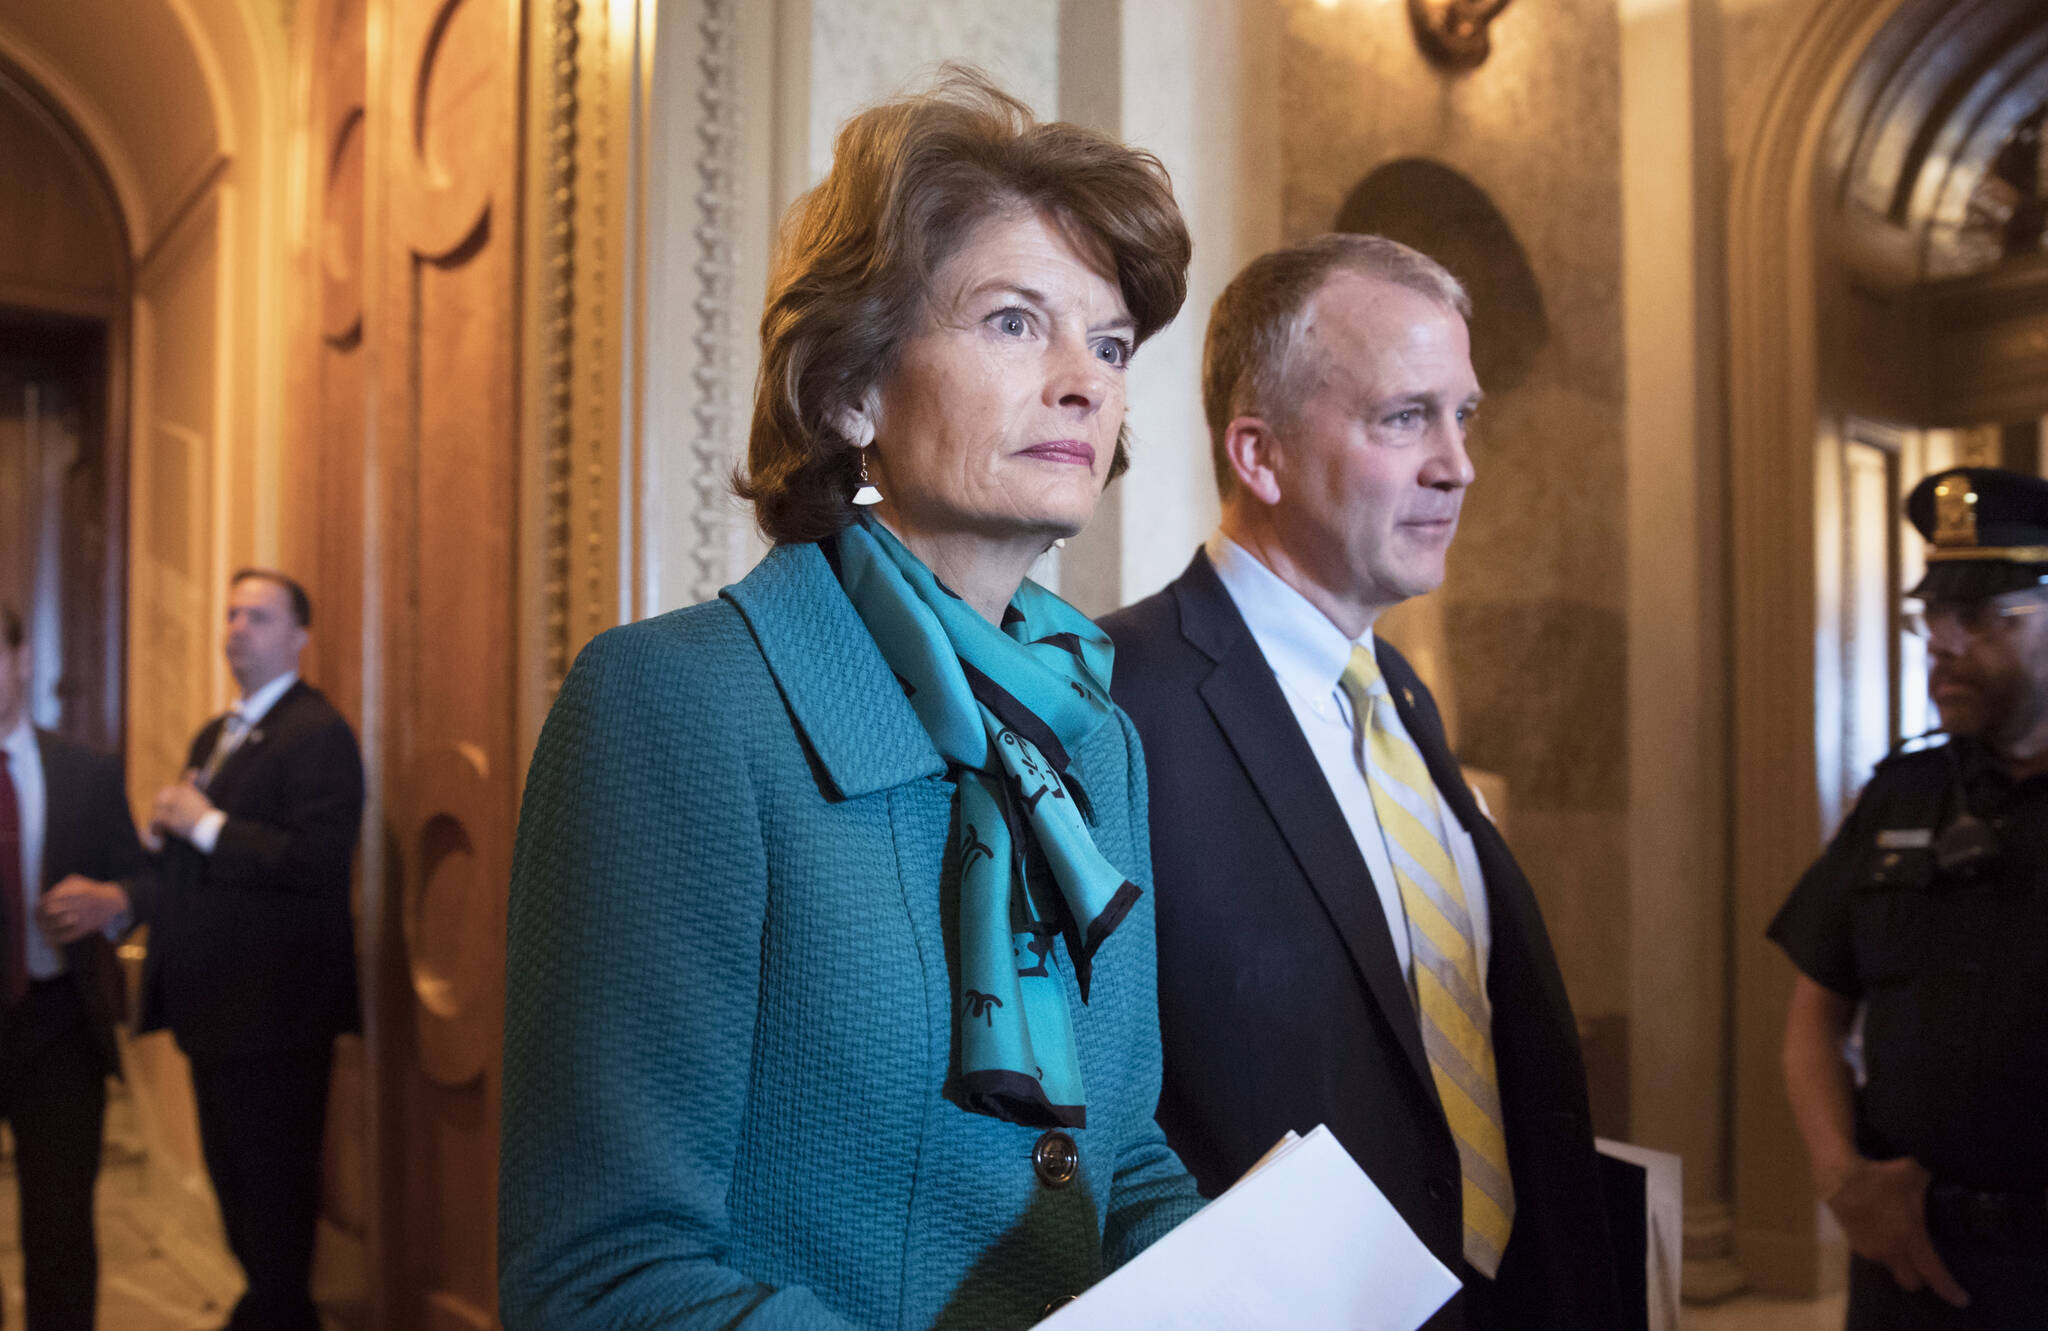 Sen. Lisa Murkowski, R-Alaska, and Sen. Dan Sullivan, R-Alaska, leave the chamber after a vote on Capitol Hill in Washington, early Wednesday, May 10, 2017. Jay Allen Johnson, 65, who faced charges of sending a series of profanity-laced voice messages to the two senators, entered guilty pleas, Monday, Jan. 3, 2022, in federal court in Fairbanks, Alaska, to two counts of threatening to kill a U.S. official. U.S. District Judge Ralph Beistline accepted Johnson’s pleas and set sentencing for April 8. (AP Photo / J. Scott Applewhite)